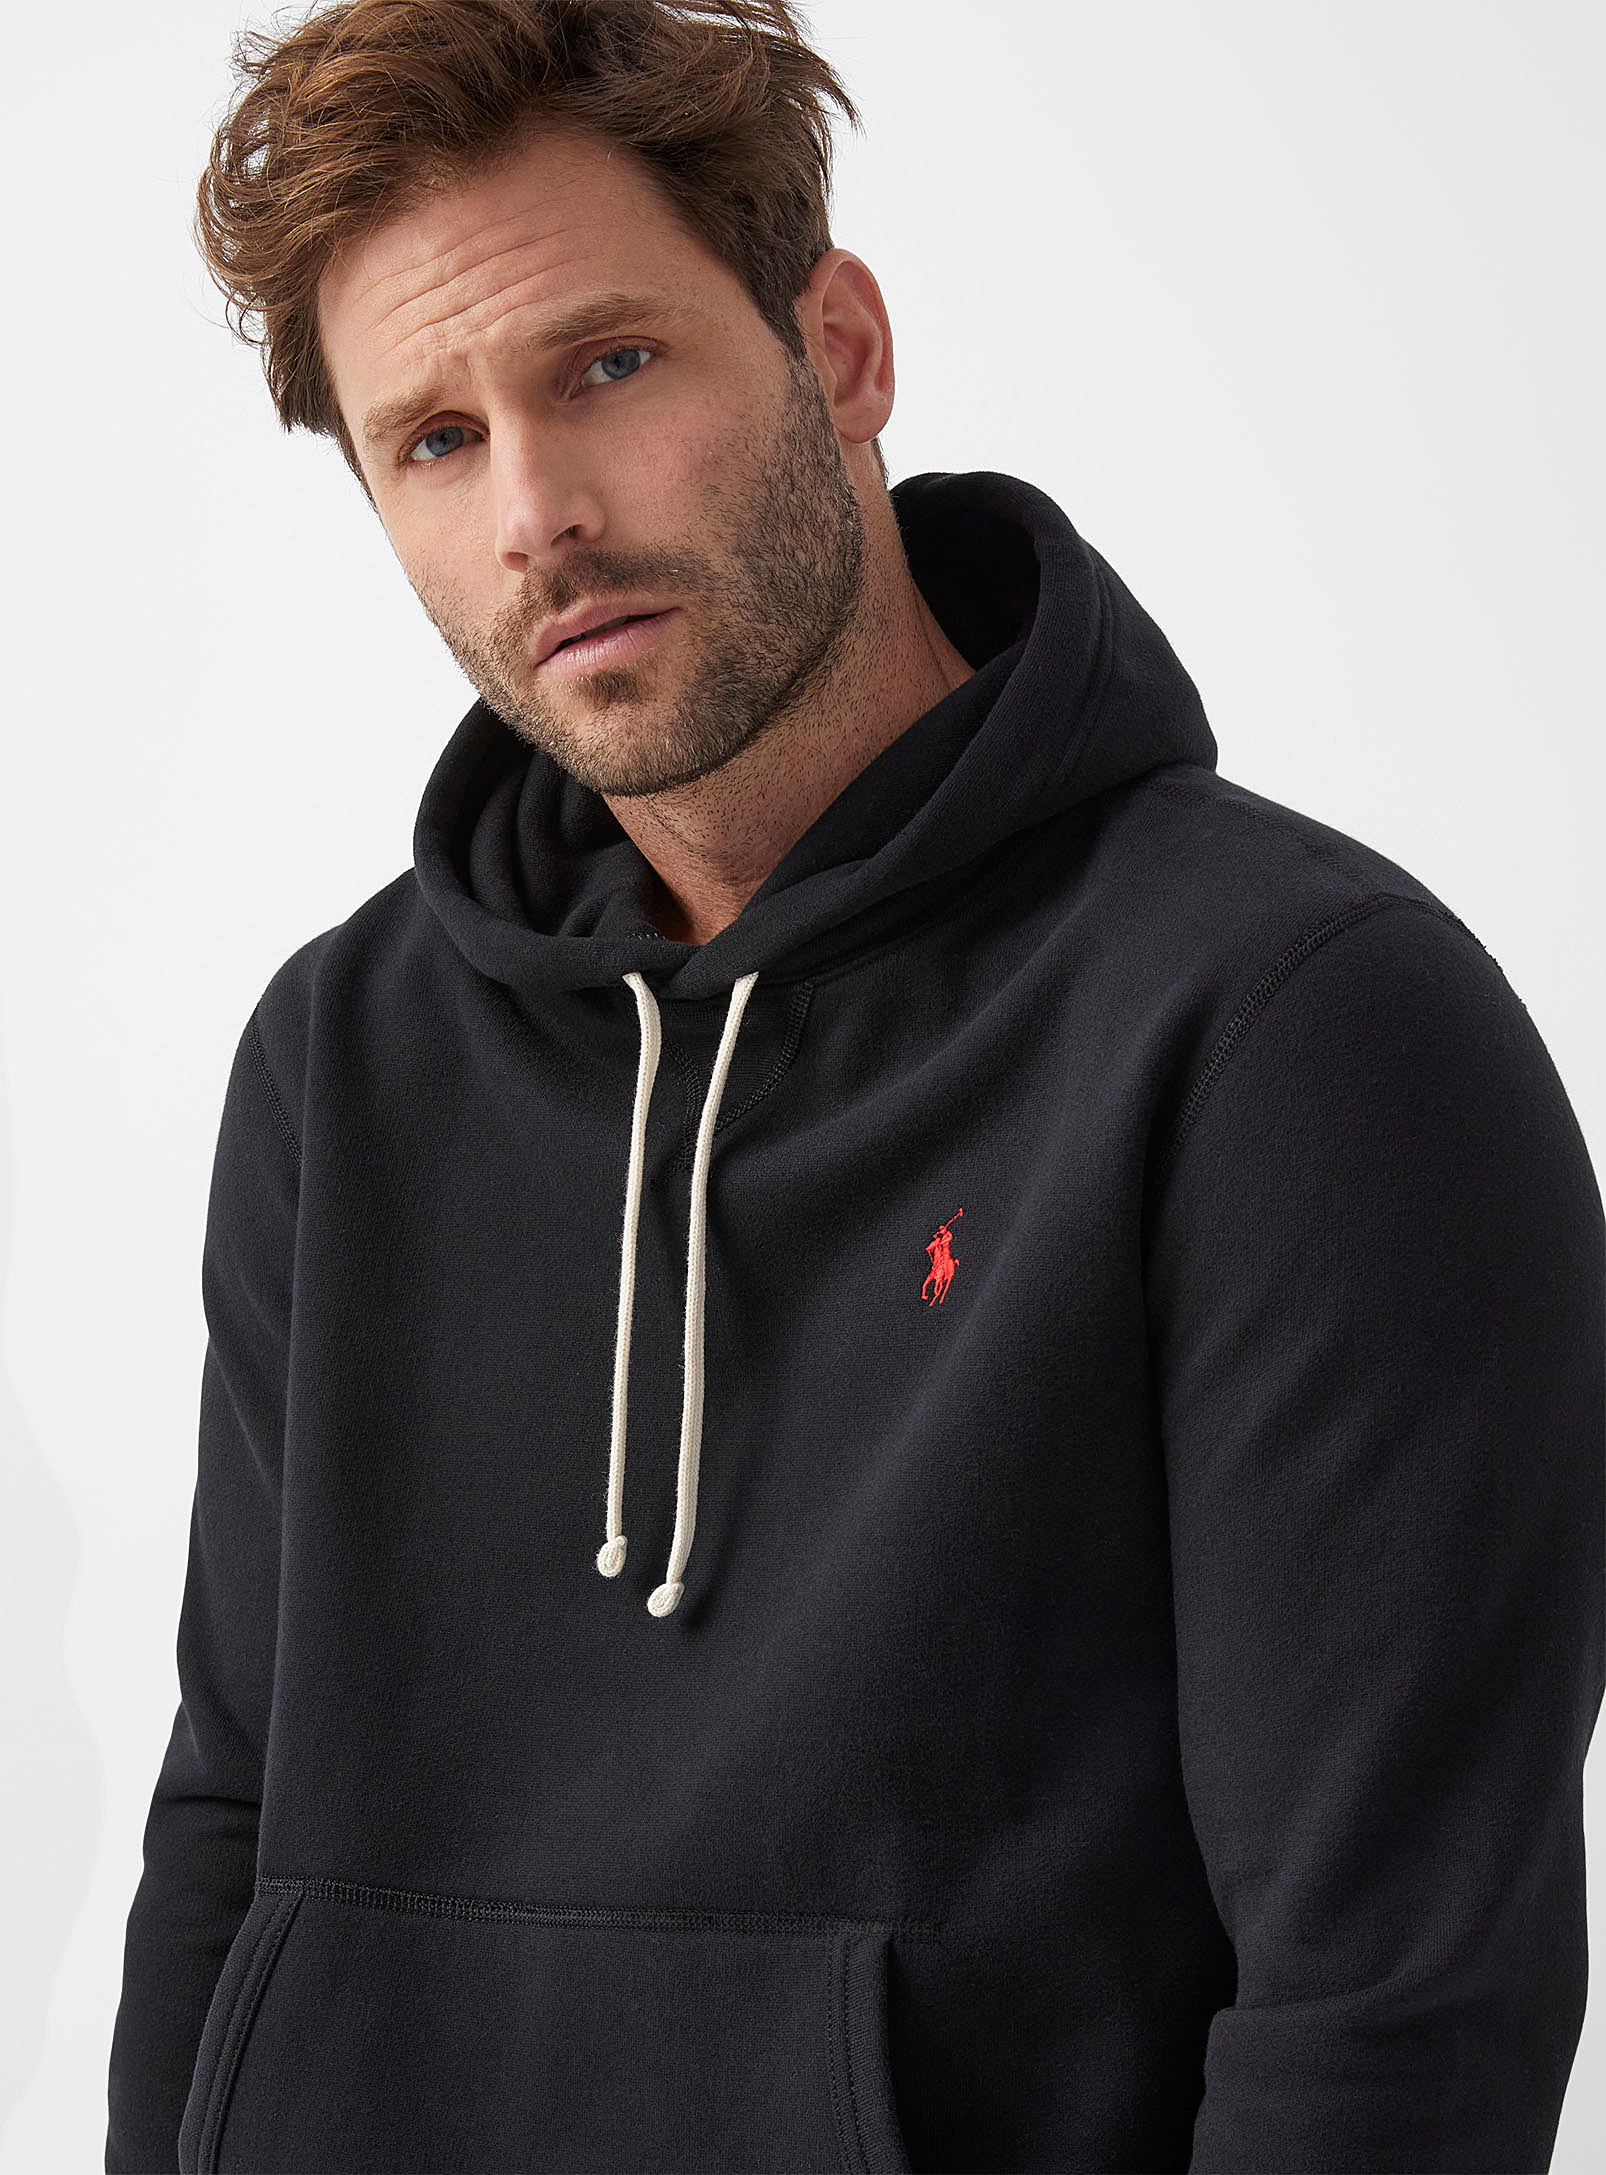 POLO RALPH LAUREN EMBROIDERED EMBLEM HOODIE